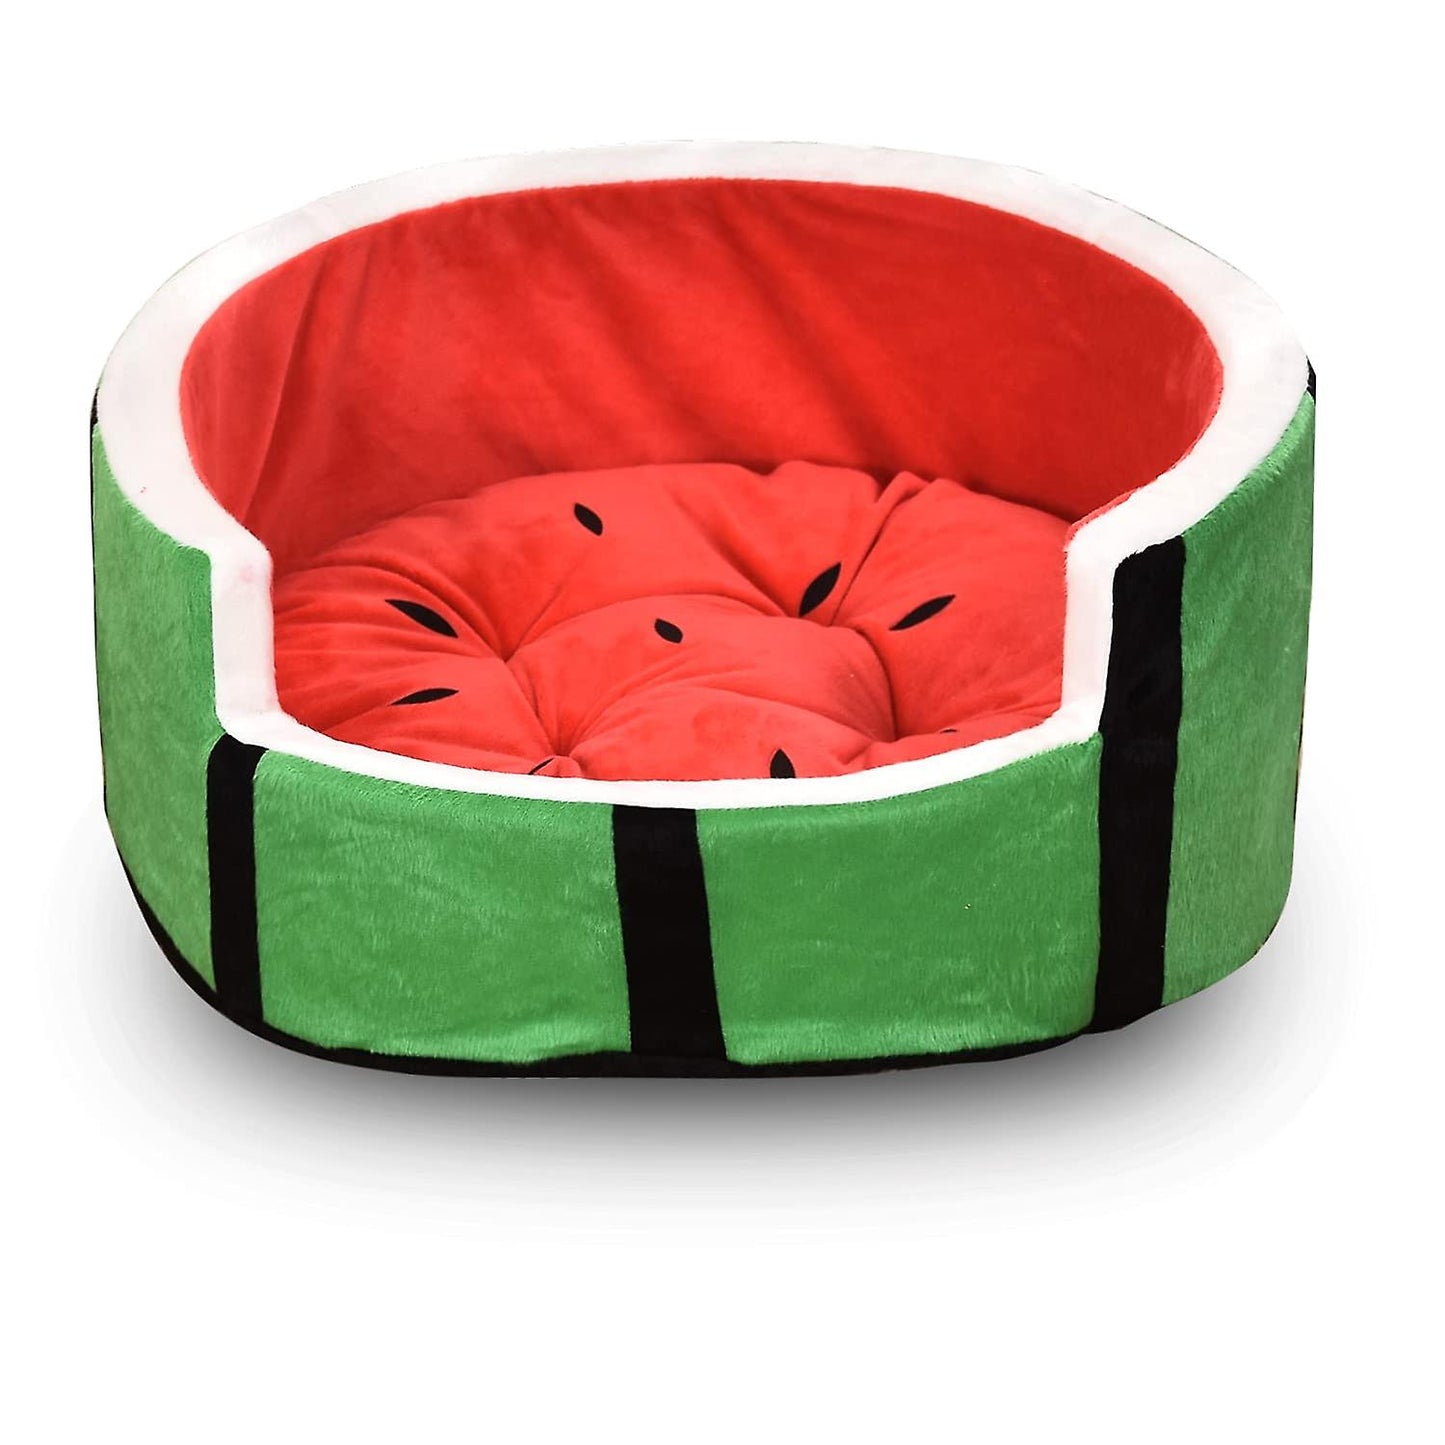 Watermelon Shaped Dog Bed Nest